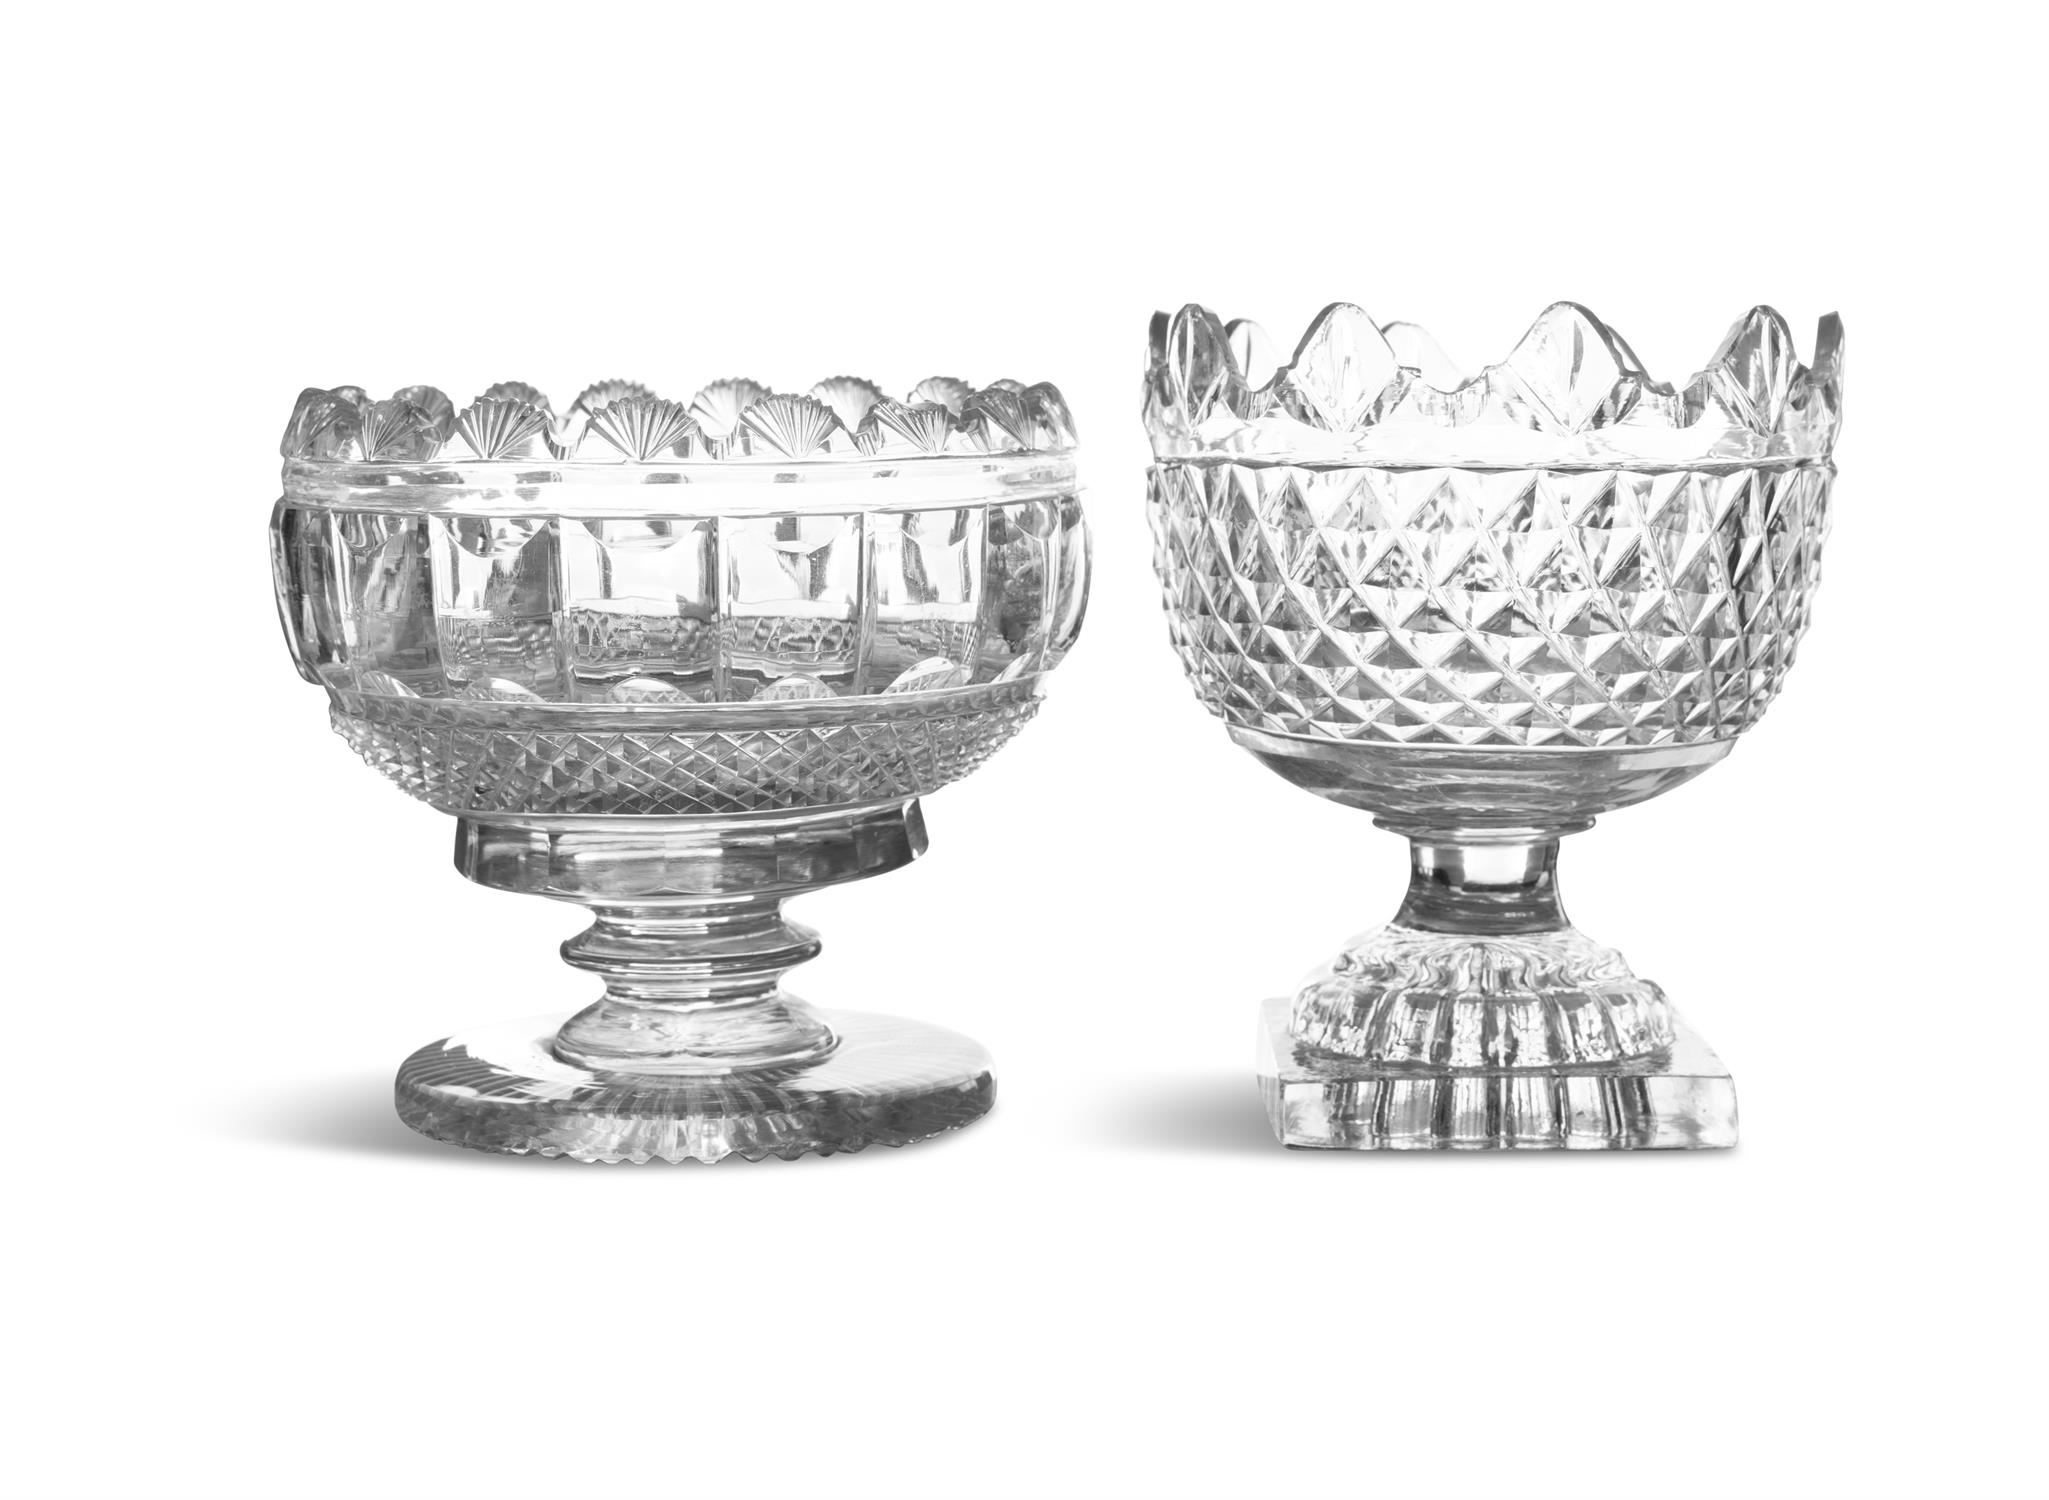 A SMALL DIAMOND-CUT BON-BON URN c. 1790, Cork or Waterford, with 'monteith' rim on moulded 'lemon